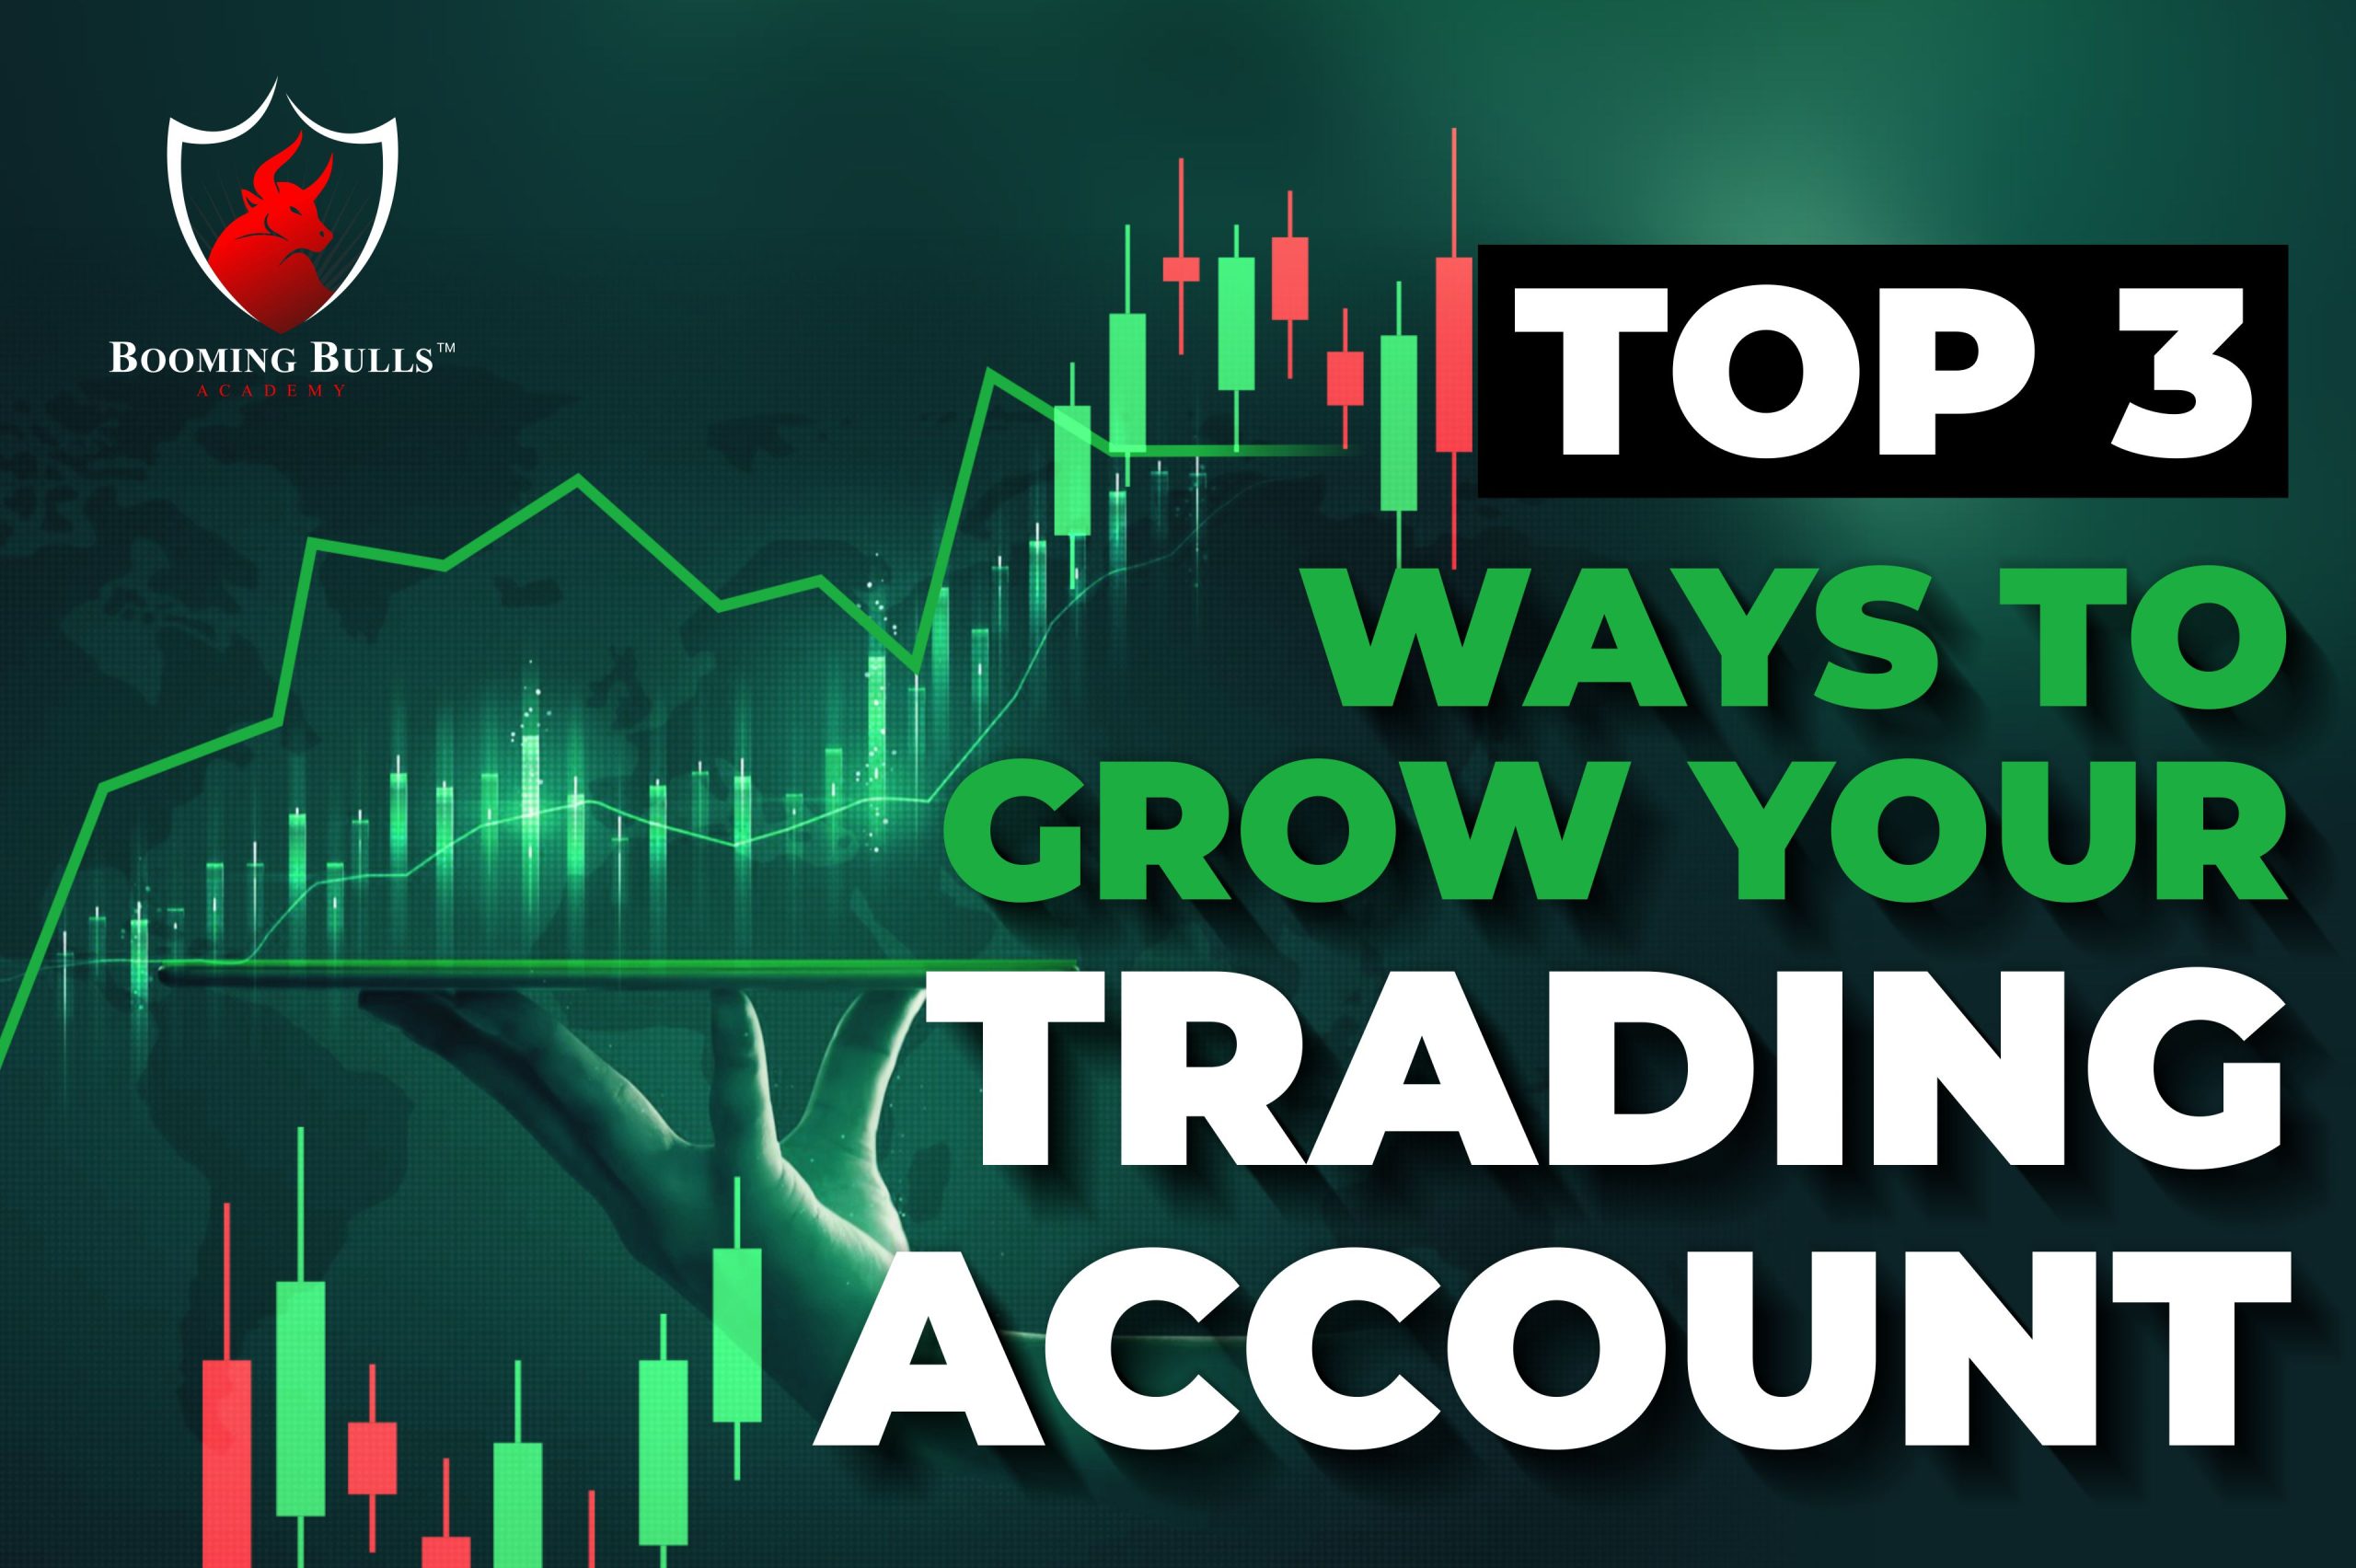 Top 3 Ways to Grow Your Trading Account